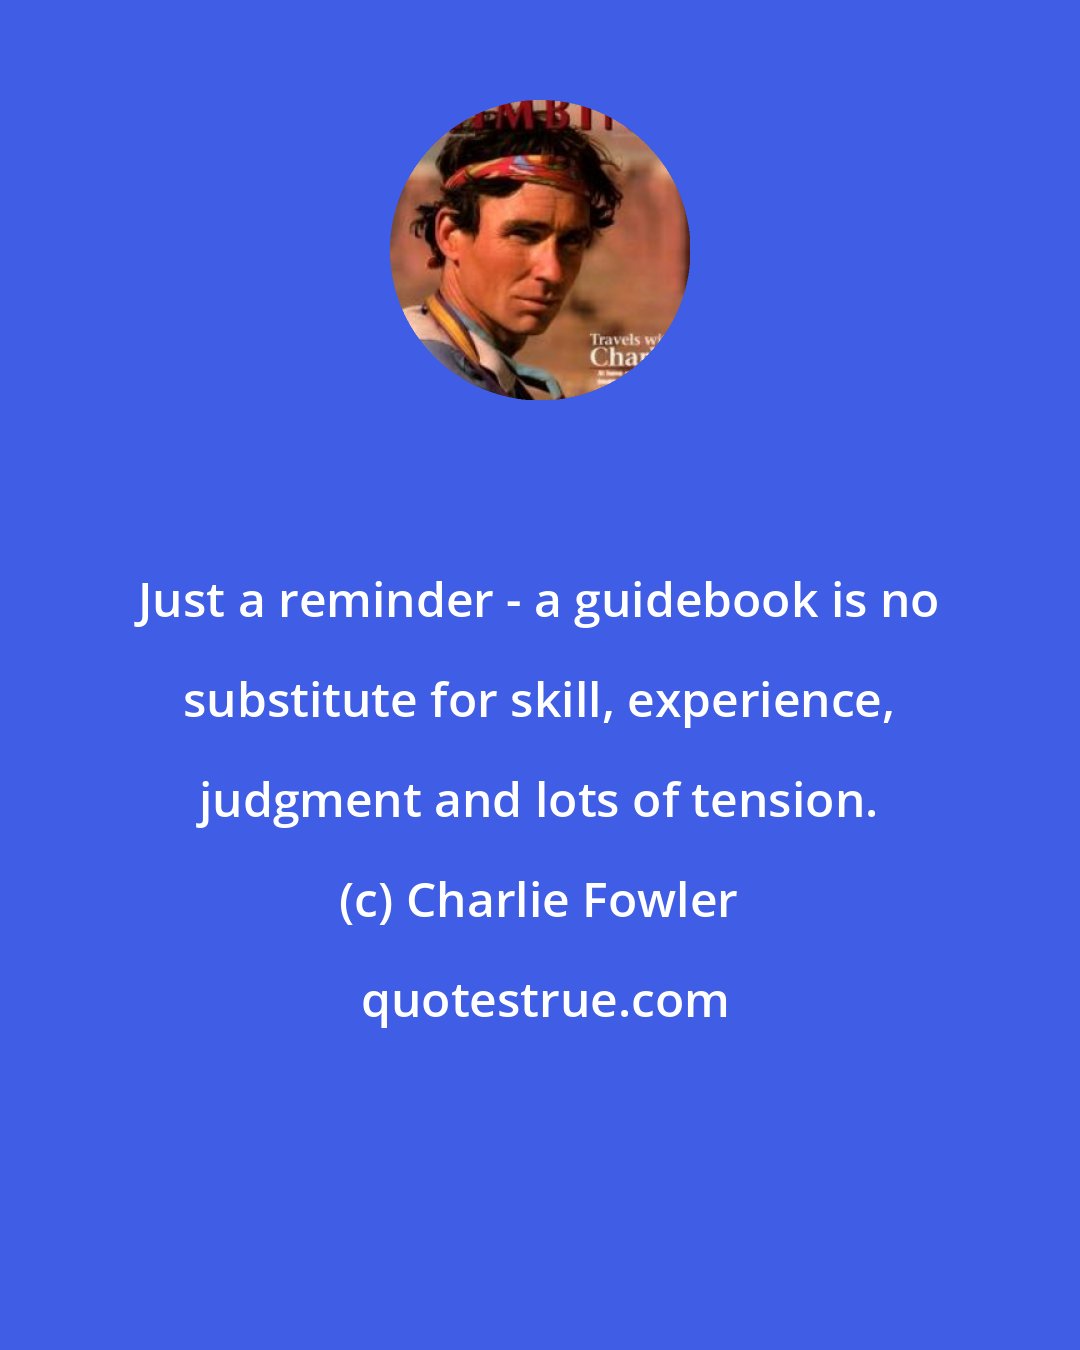 Charlie Fowler: Just a reminder - a guidebook is no substitute for skill, experience, judgment and lots of tension.